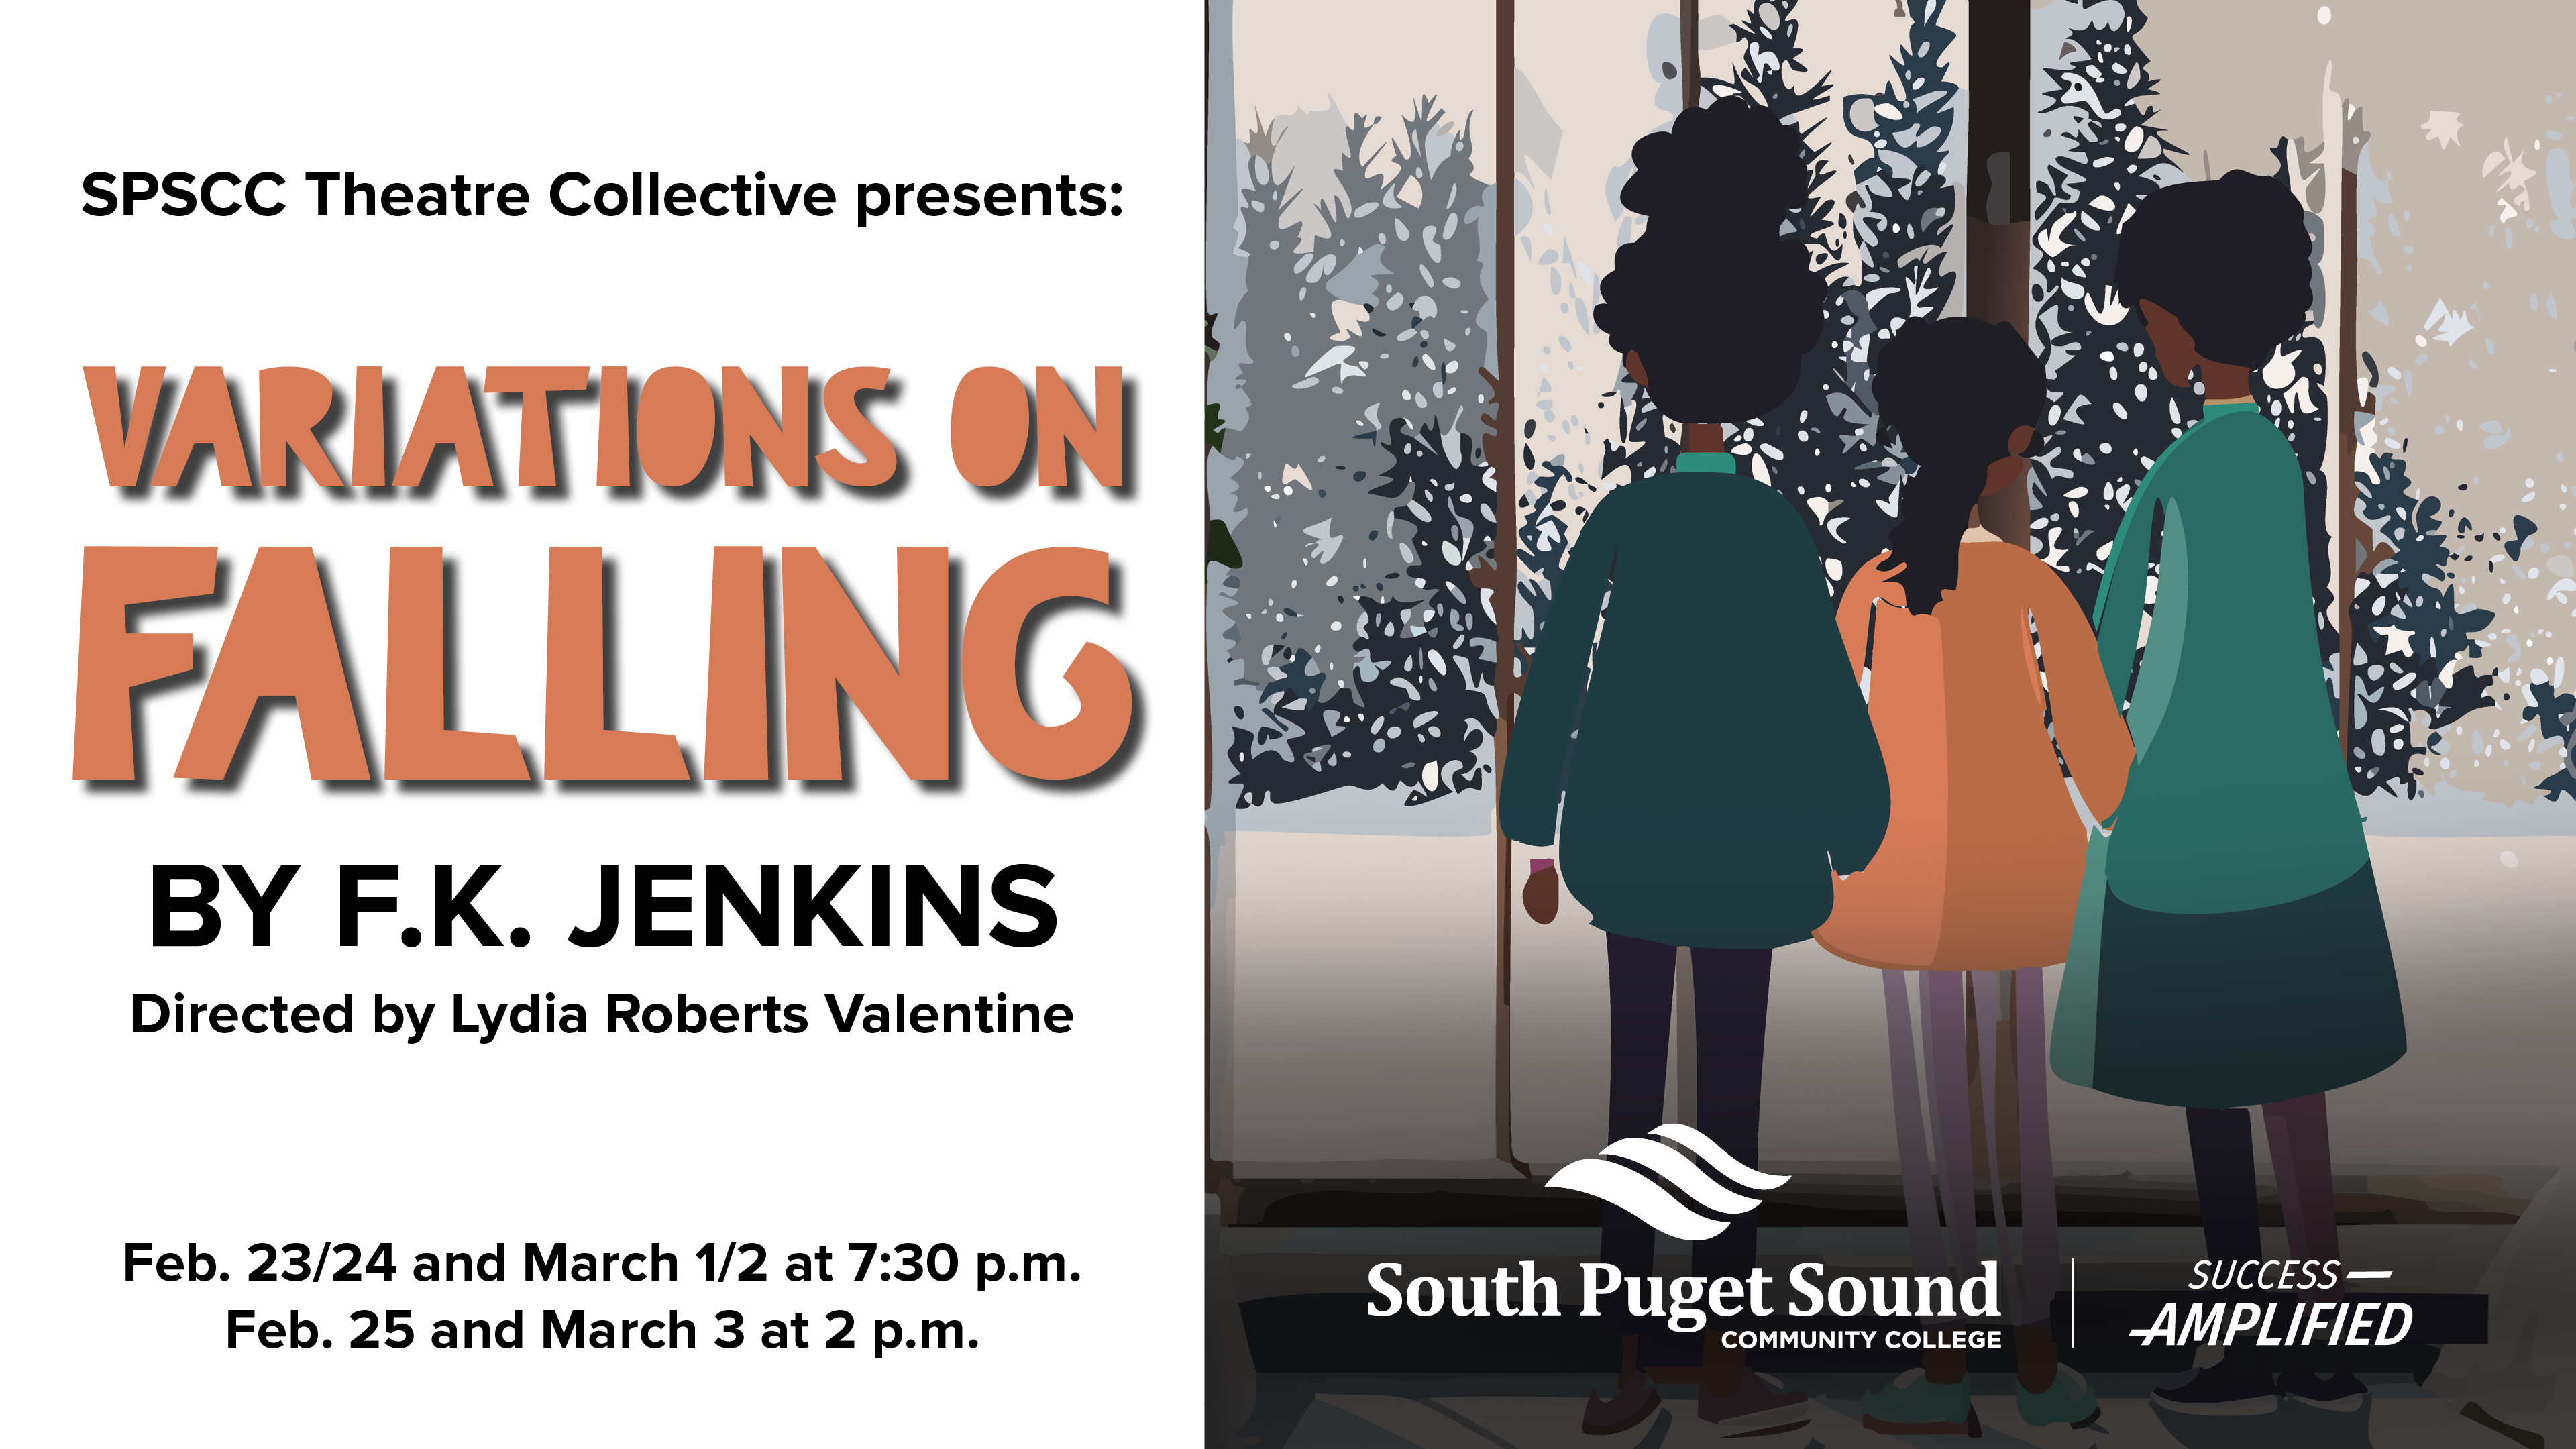 SPSCC Theatre Collective presents Variations on Falling by F.K. Jenkins. Directed by Lydia Roberts Valentine. Feb. 23, 24 & March 1, 2 at 7:30 p.m. Feb. 25 and March 3 at 2 p.m.